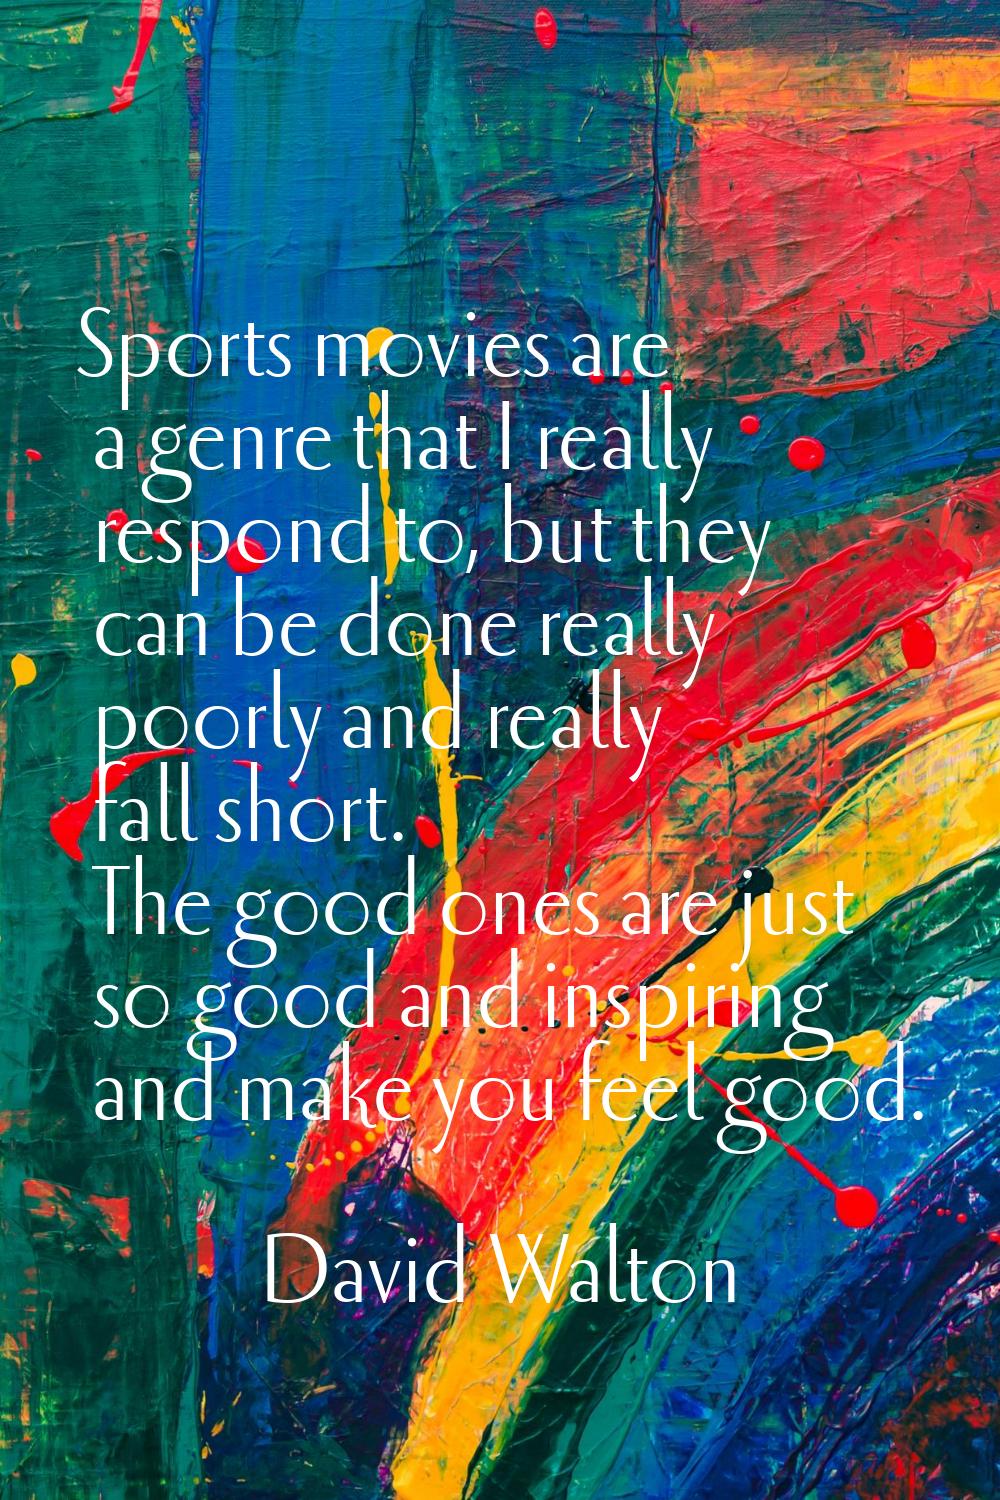 Sports movies are a genre that I really respond to, but they can be done really poorly and really f